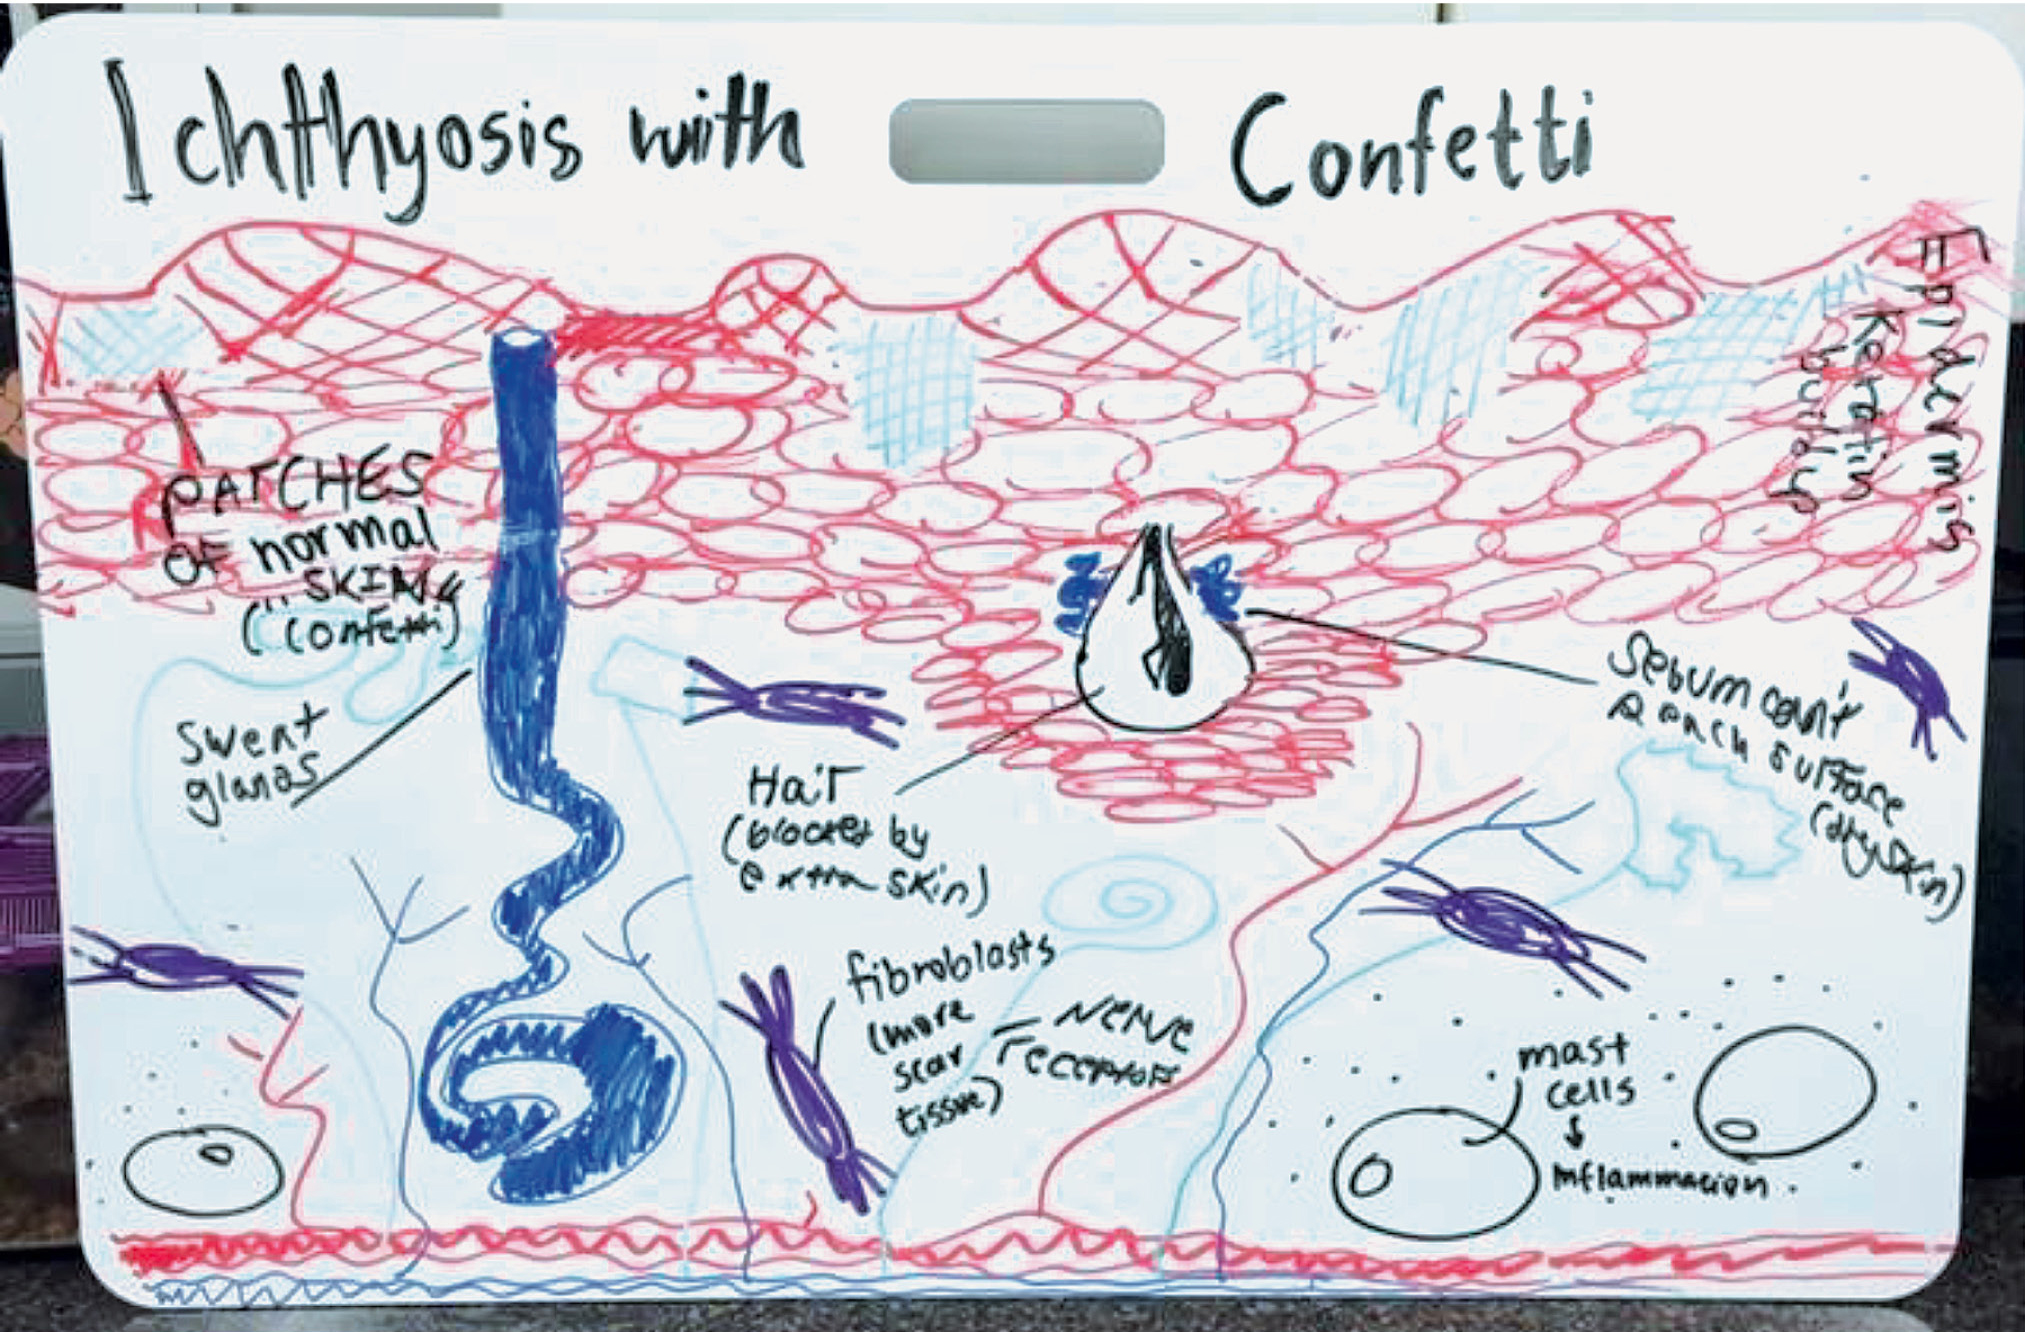 Figure 2 The hypothesis and modeling of the cause and effect of a skin condition called “Ichthyosis with Confetti” by a group of four students.